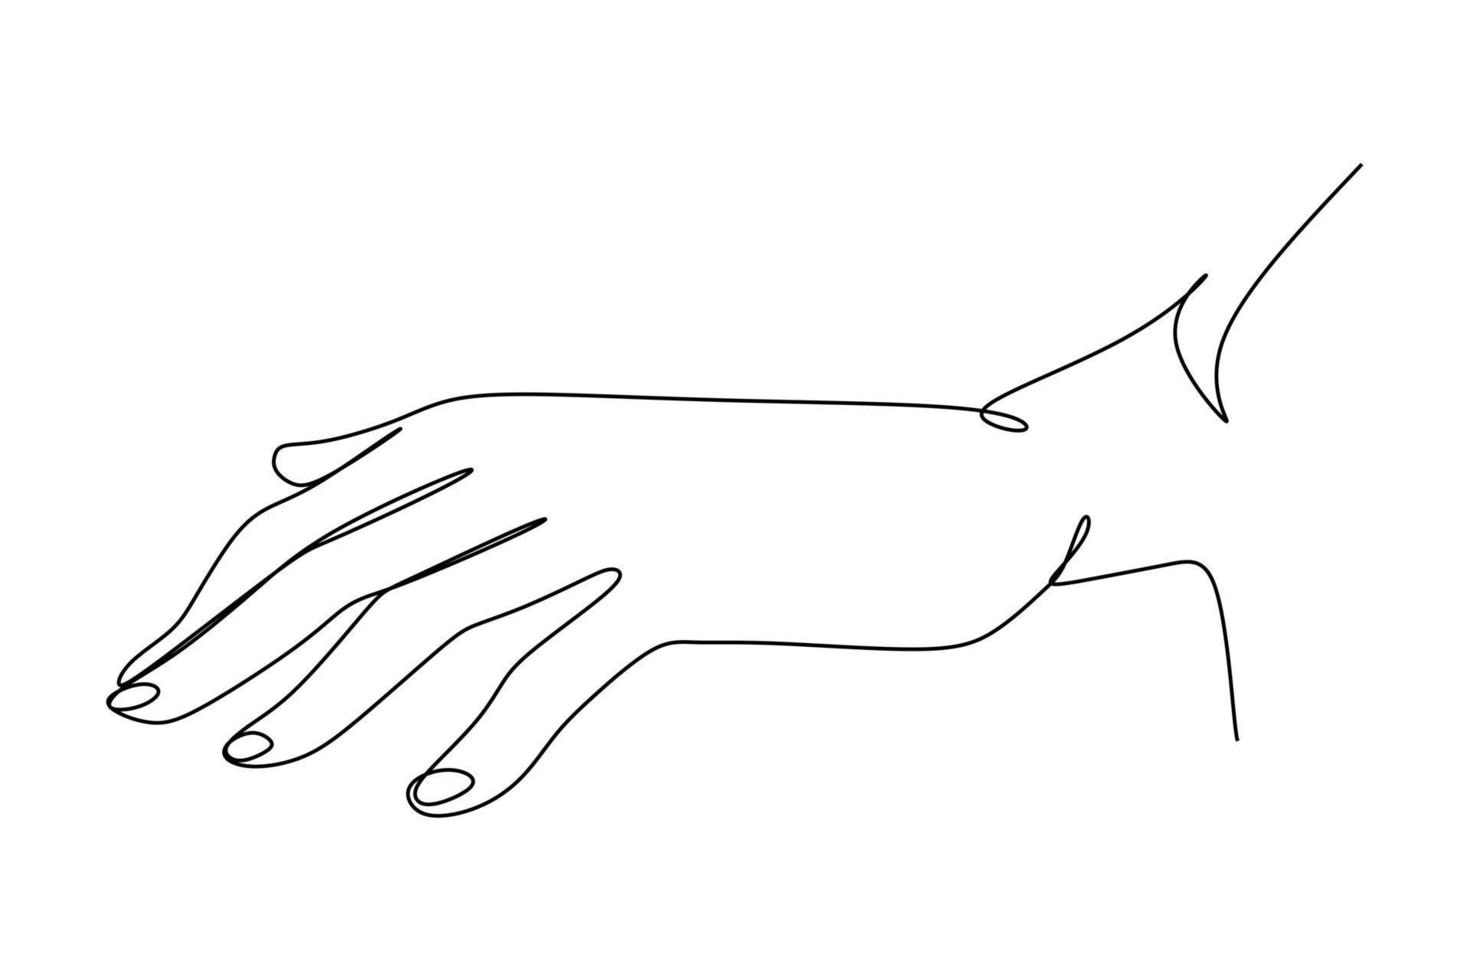 Continuous Line Drawing of Hand Trendy Minimalist Illustration. One Line Abstract Concept. Hands Minimalist Contour Drawing. Vector EPS 10